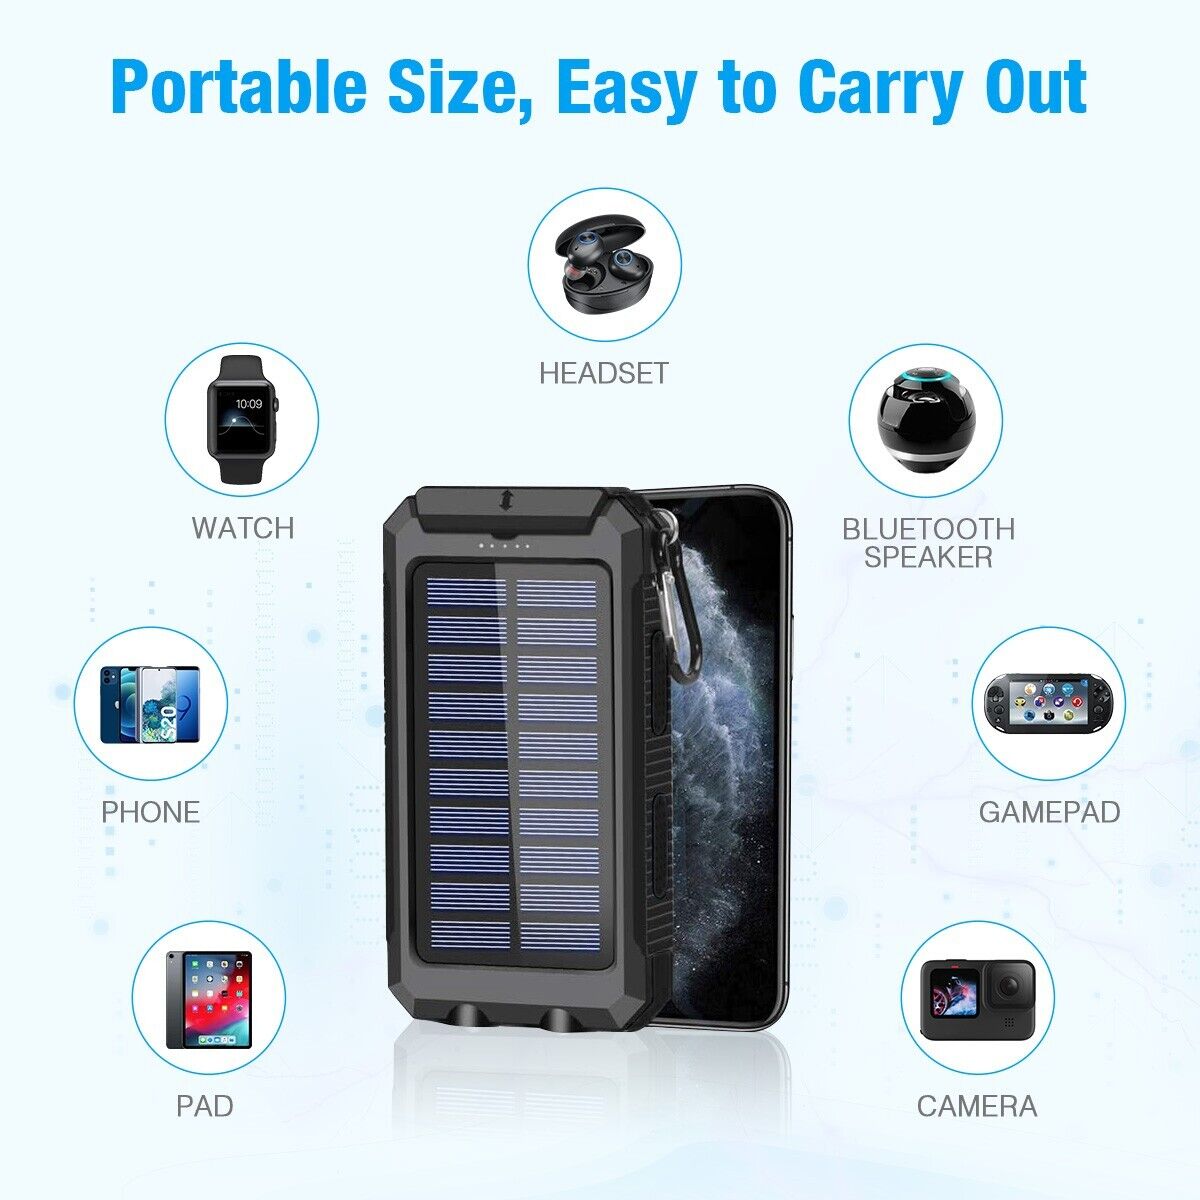 SOS Solar Phone Charger